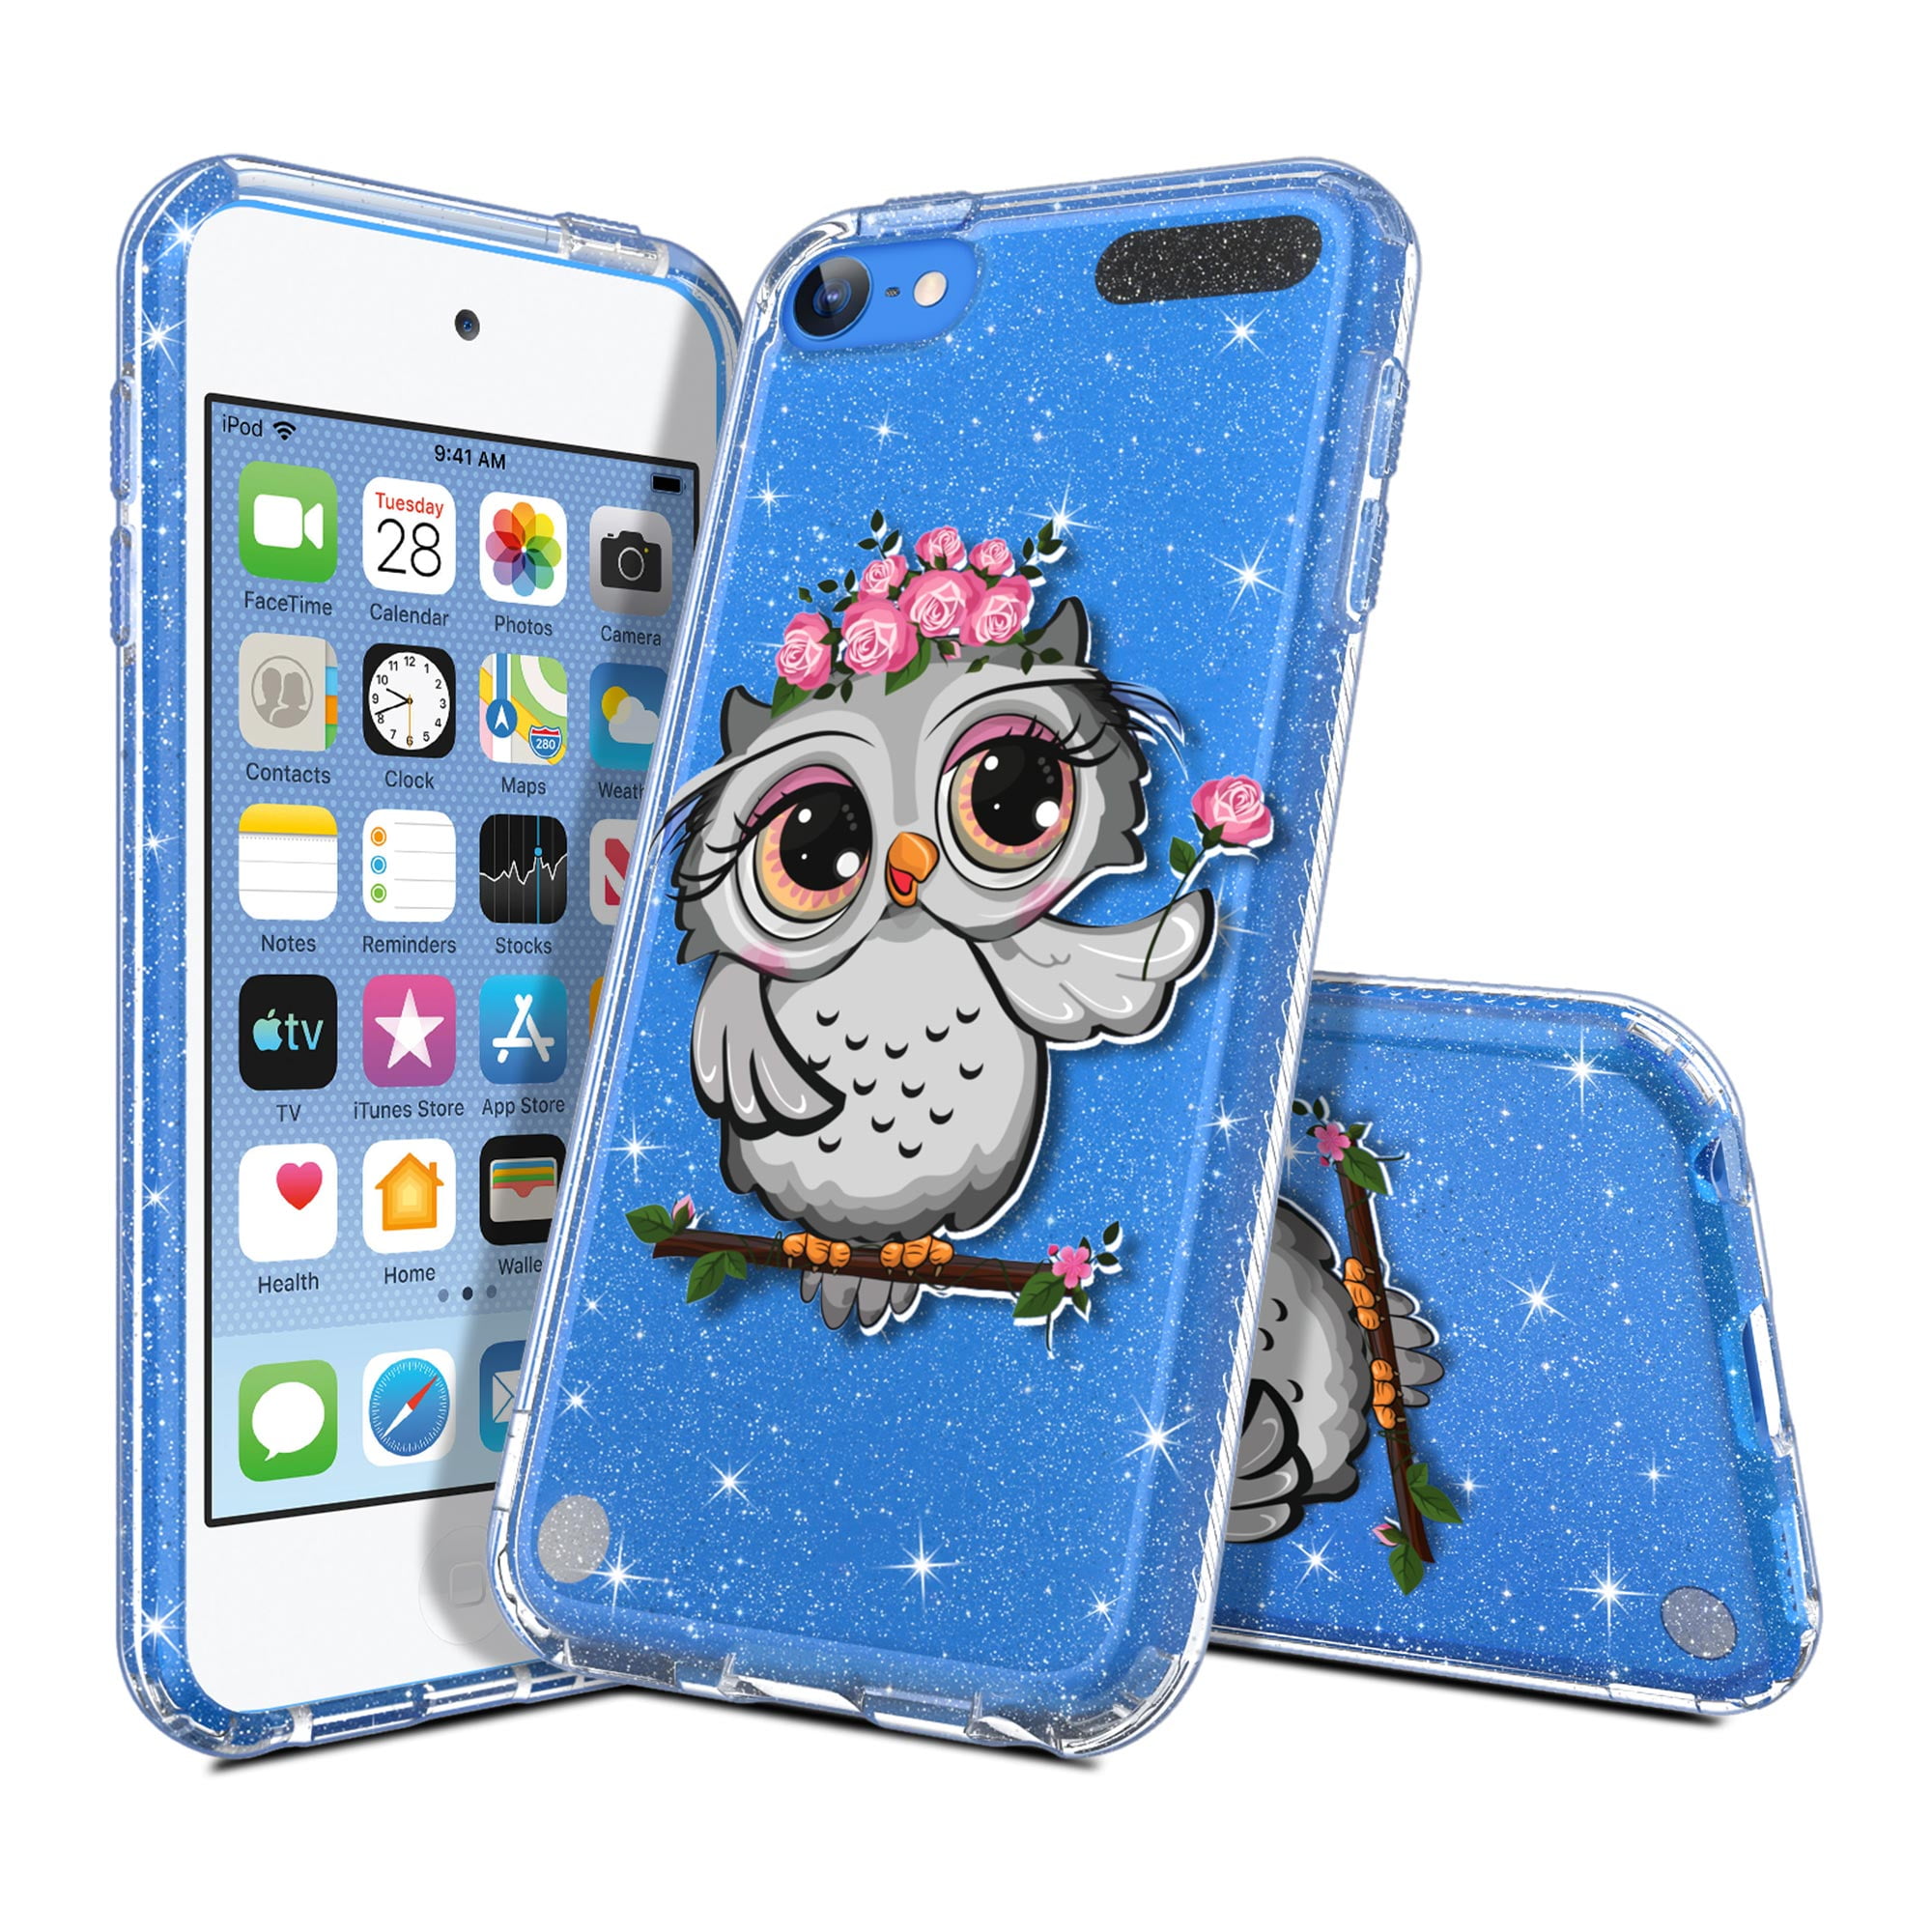 iPod Touch 6 Case Slim Fit Anti-Scratch Flexible Soft TPU Bumper Hybrid Shockproof Protective Cover for Apple iPod Touch 5/6/7th Generation Mint Floral ULAK iPod Touch 7 Case 